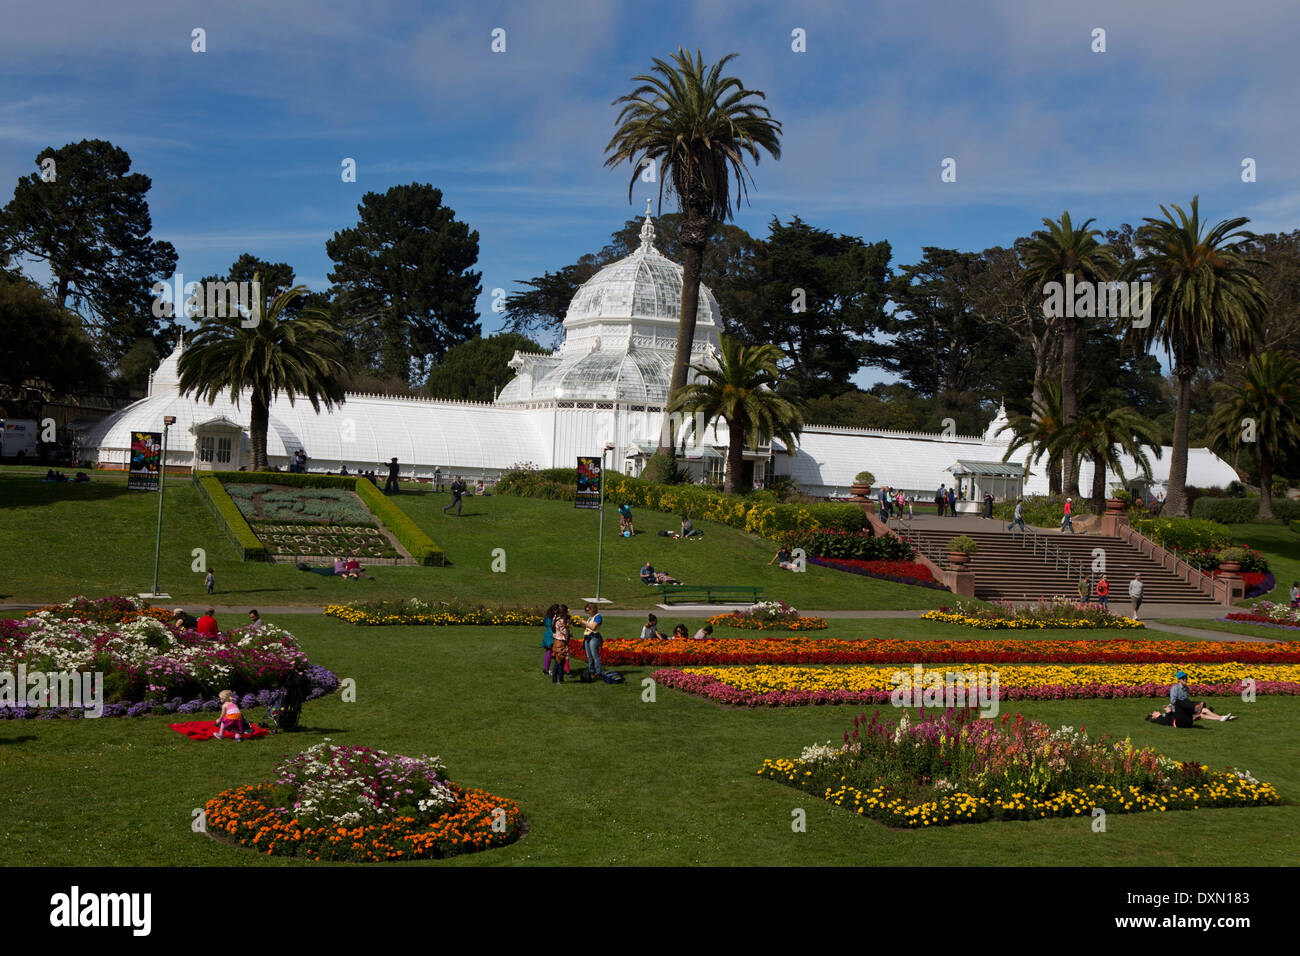 People sitting in the yard in front the Conservatory of Flowers, Golden Gate Park, San Francisco, California, United States of America Stock Photo